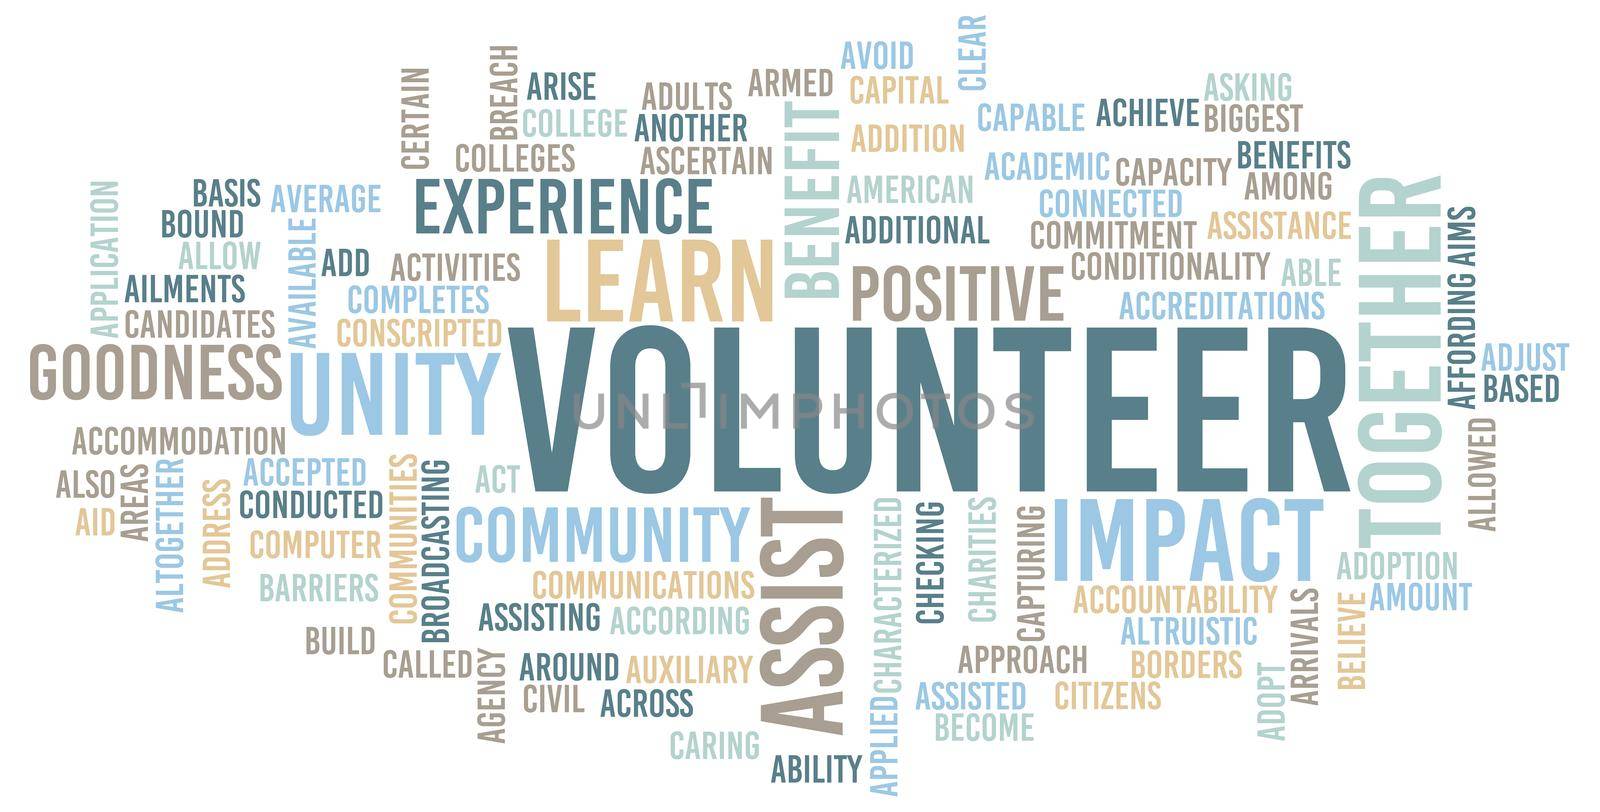 Volunteer as a Community Charity Hope Concept Abstract